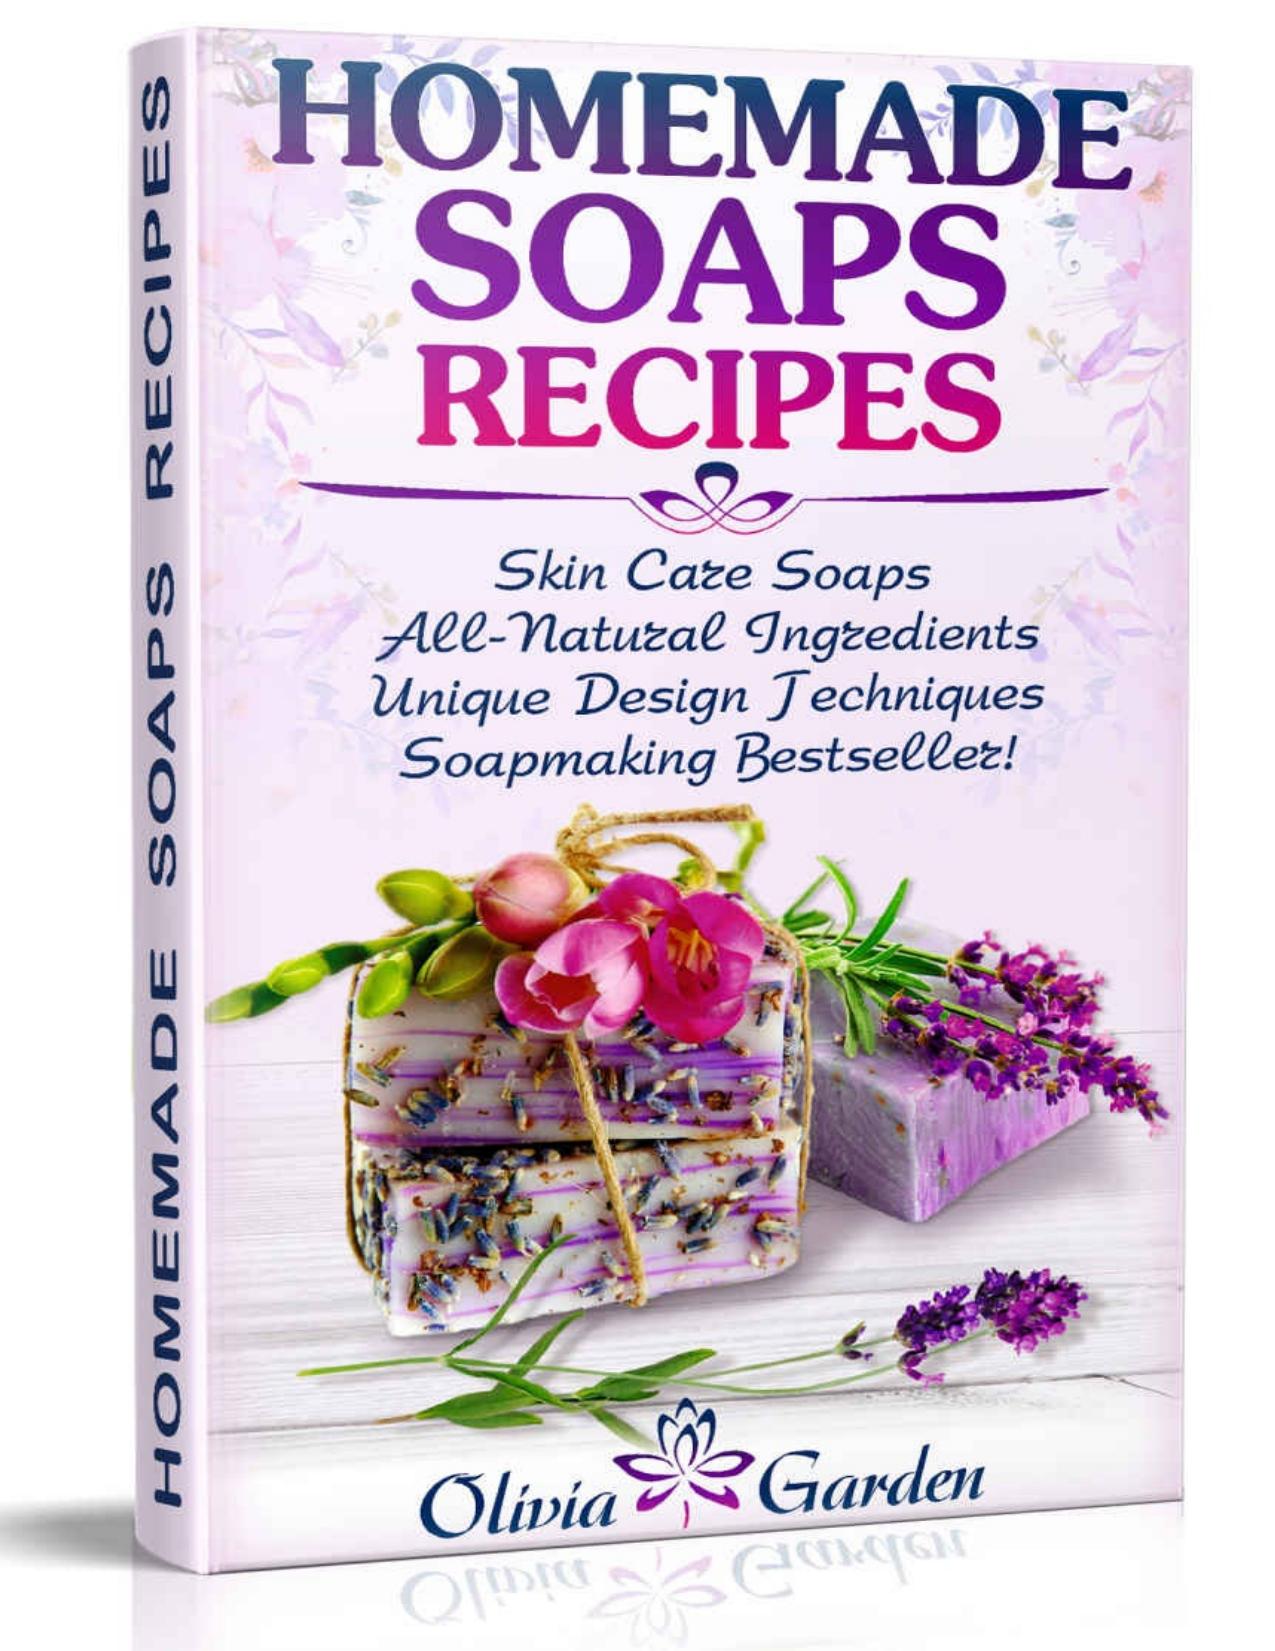 Homemade Soaps Recipes: Natural Handmade Soap, Soapmaking book with Step by Step Guidance for Cold Process of Soap Making \( How to Make Hand Made Soap, Ingredients, Soapmaking Supplies, Design Ideas\) - PDFDrive.com